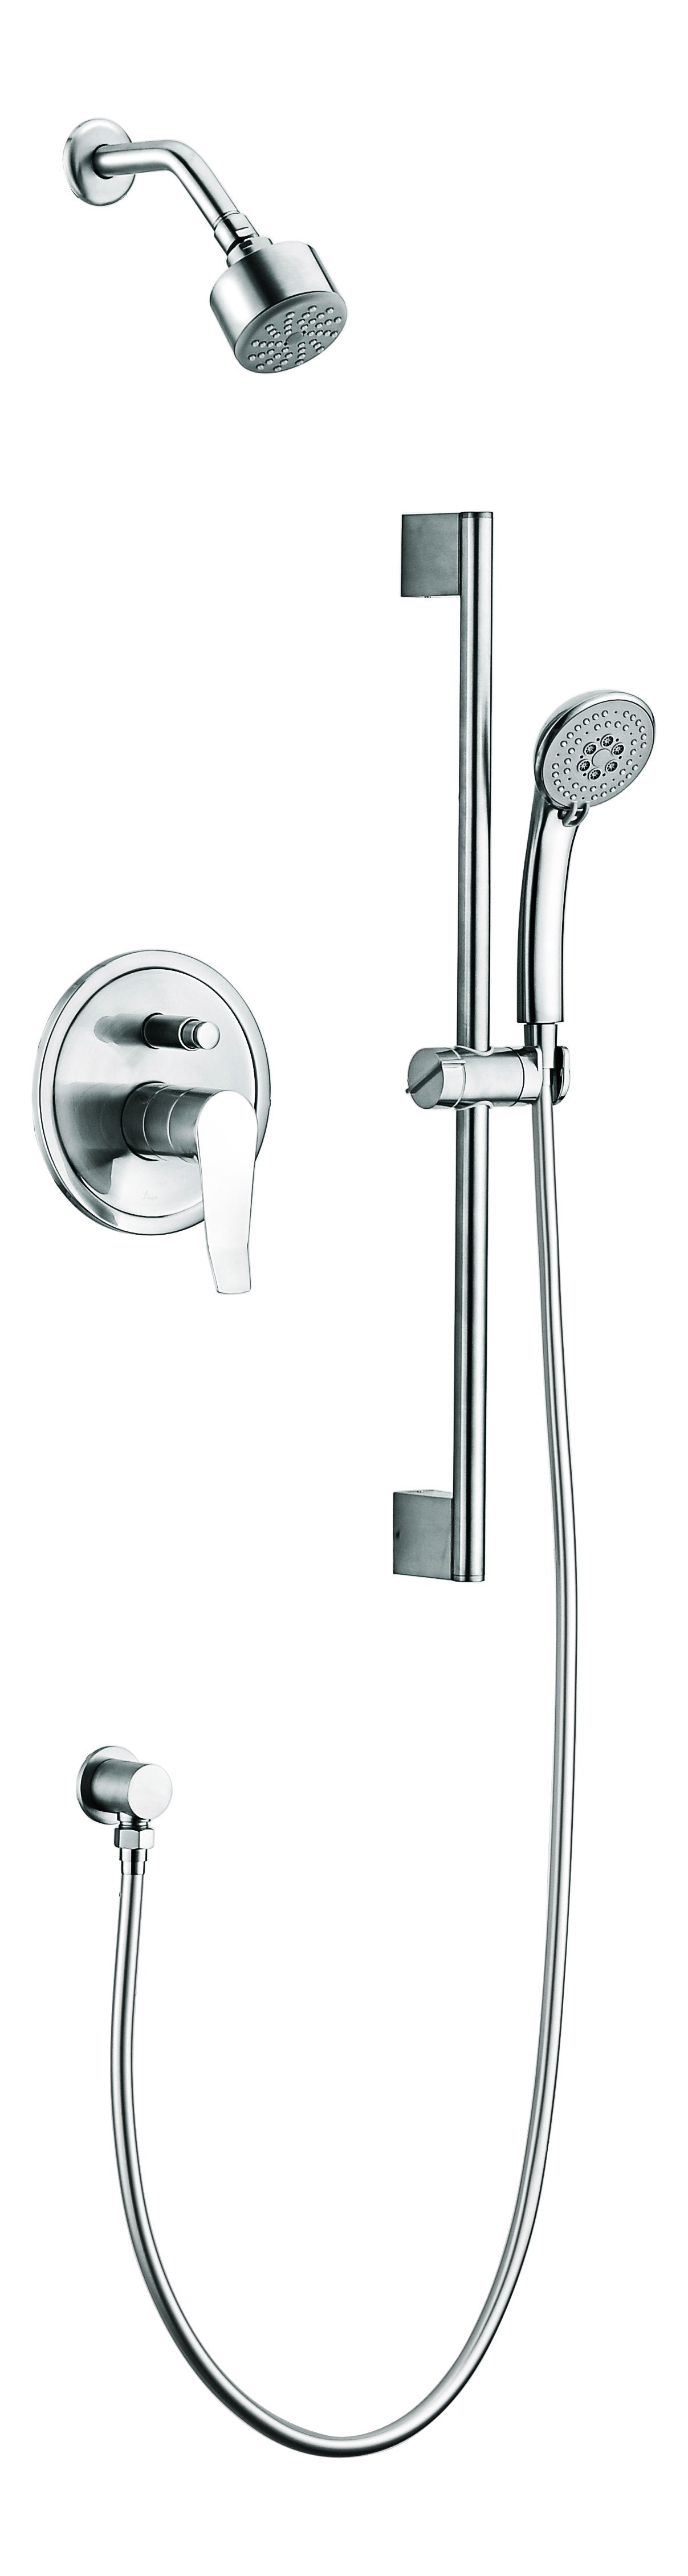 Dawn Everglades Series Shower Combo Set Wall Mounted Showerhead with Slide Bar Handheld Shower-Shower Faucets Fast Shipping at DirectSinks.